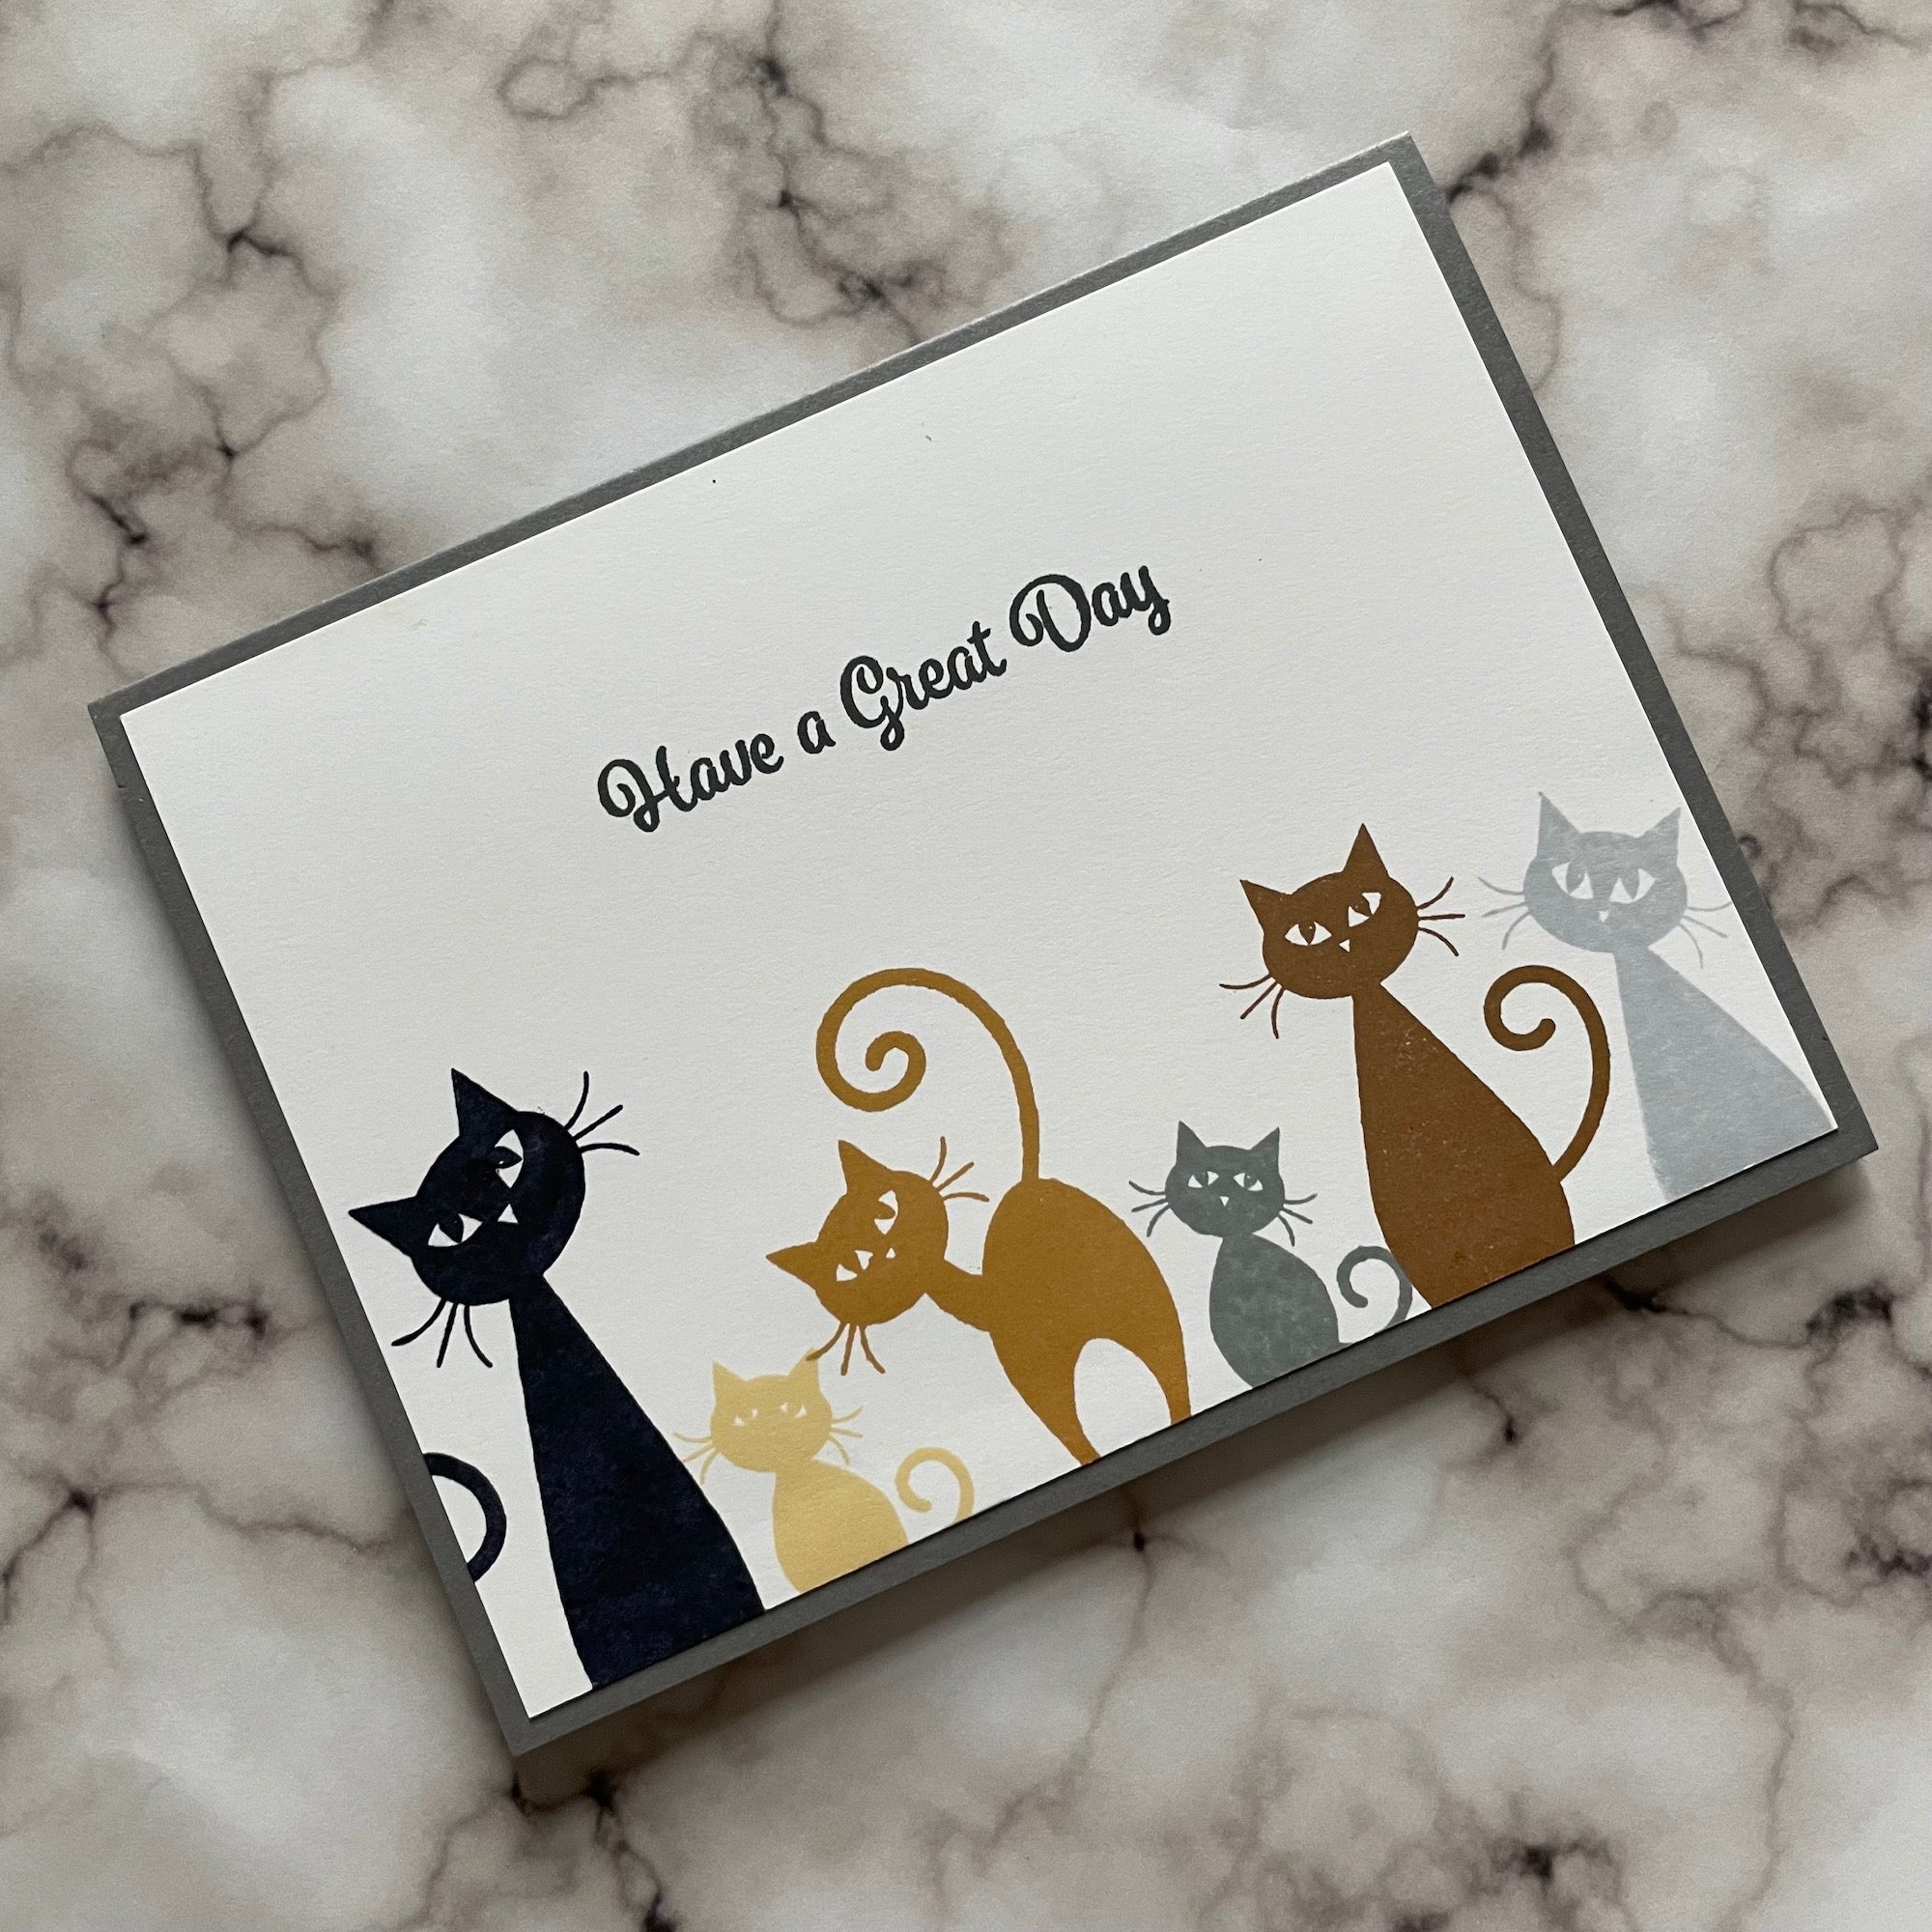 STAMPS- Cordial Cats – Gina K Designs, LLC